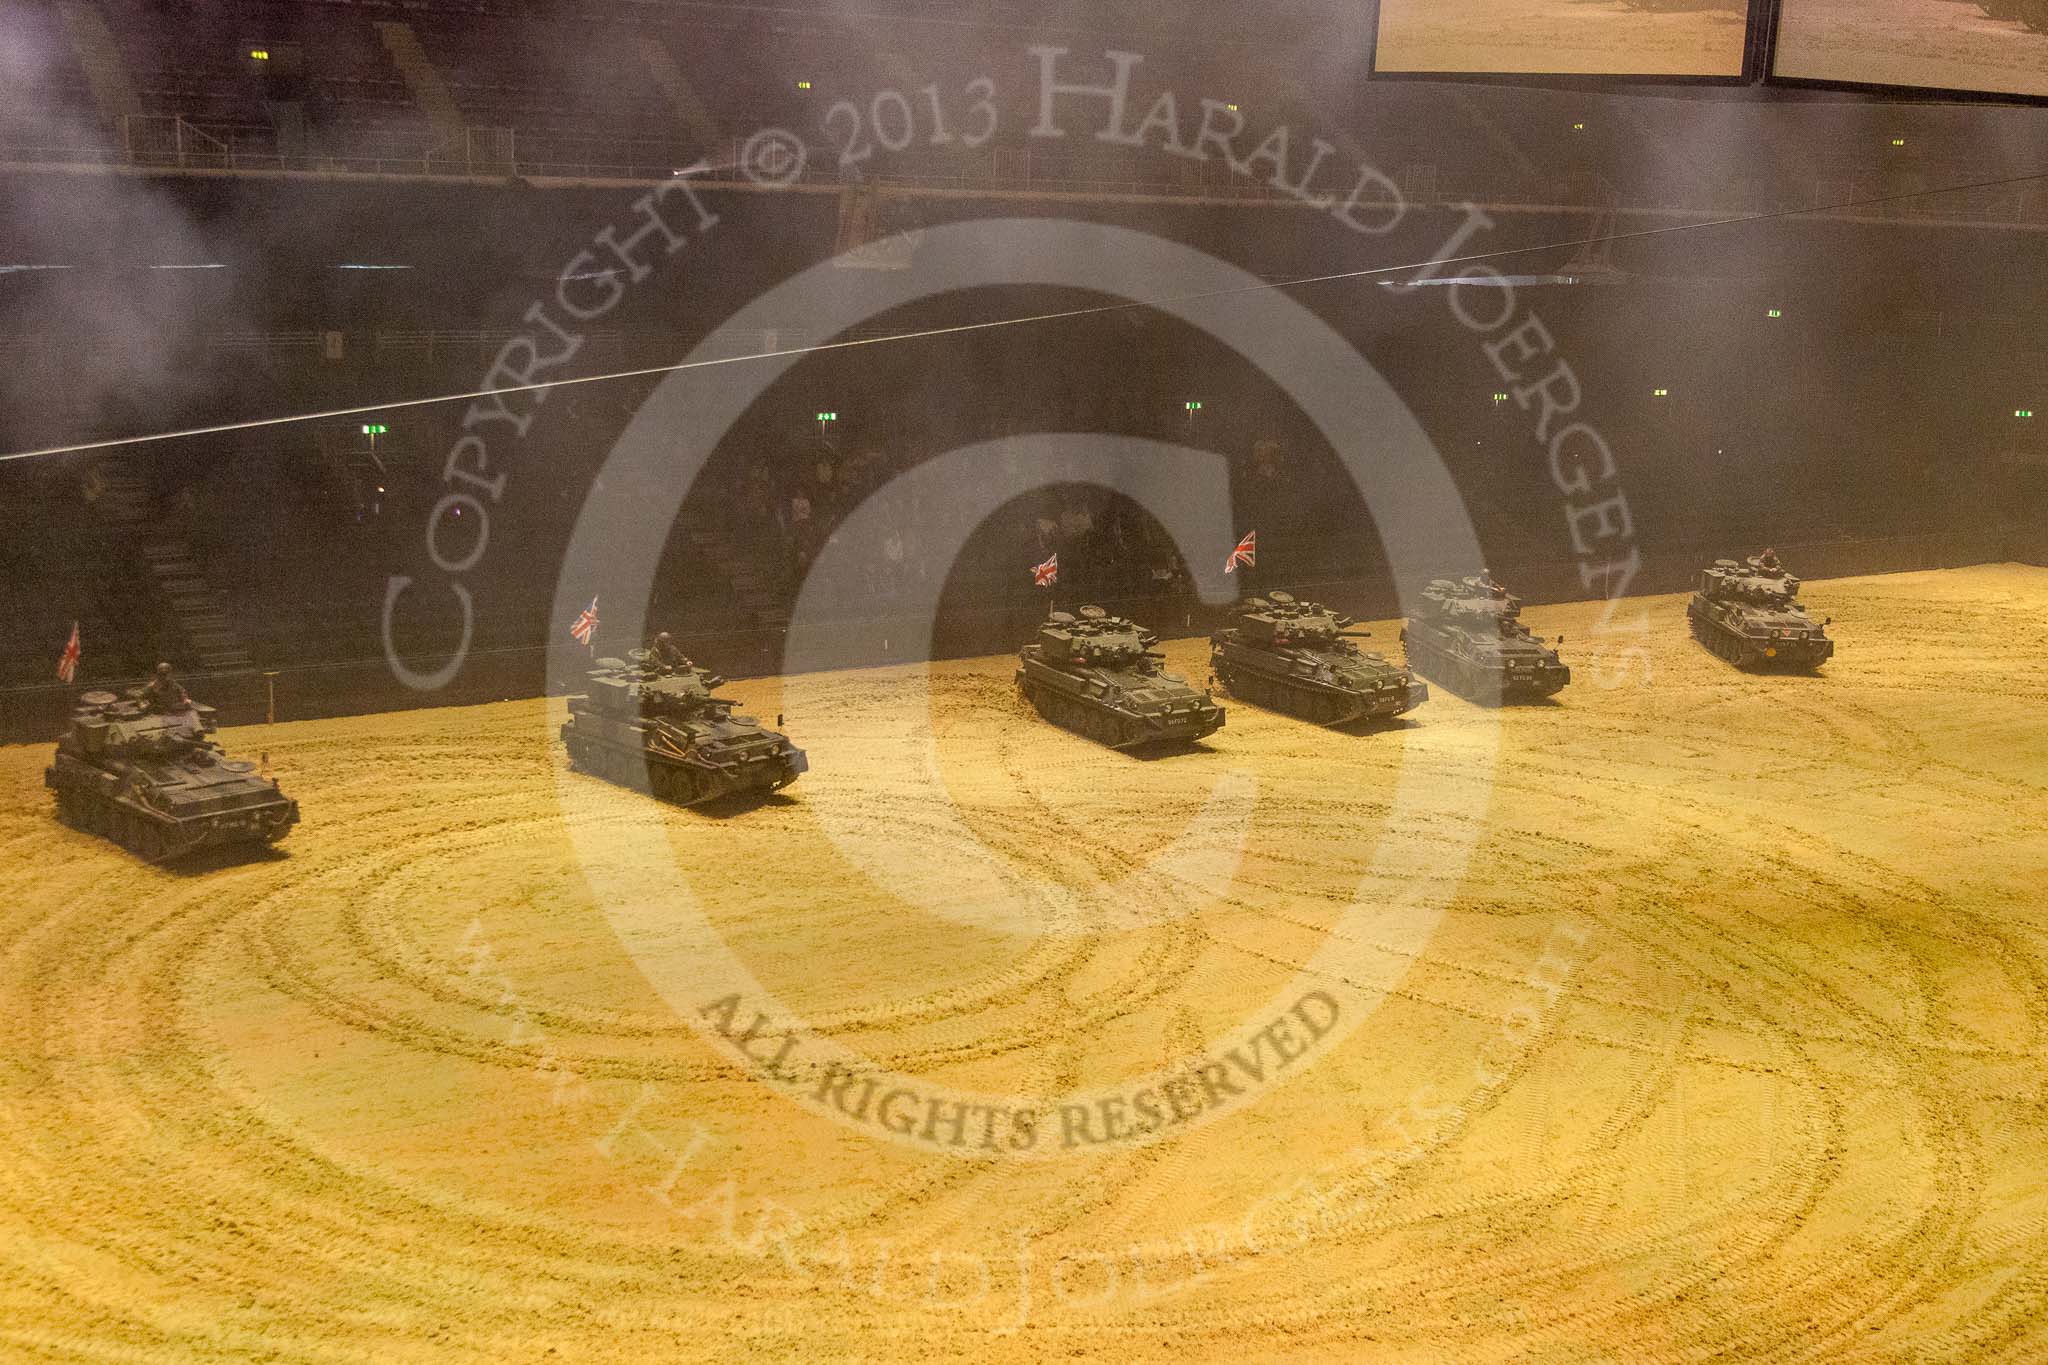 British Military Tournament 2013.
Earls Court,
London SW5,

United Kingdom,
on 06 December 2013 at 16:23, image #400